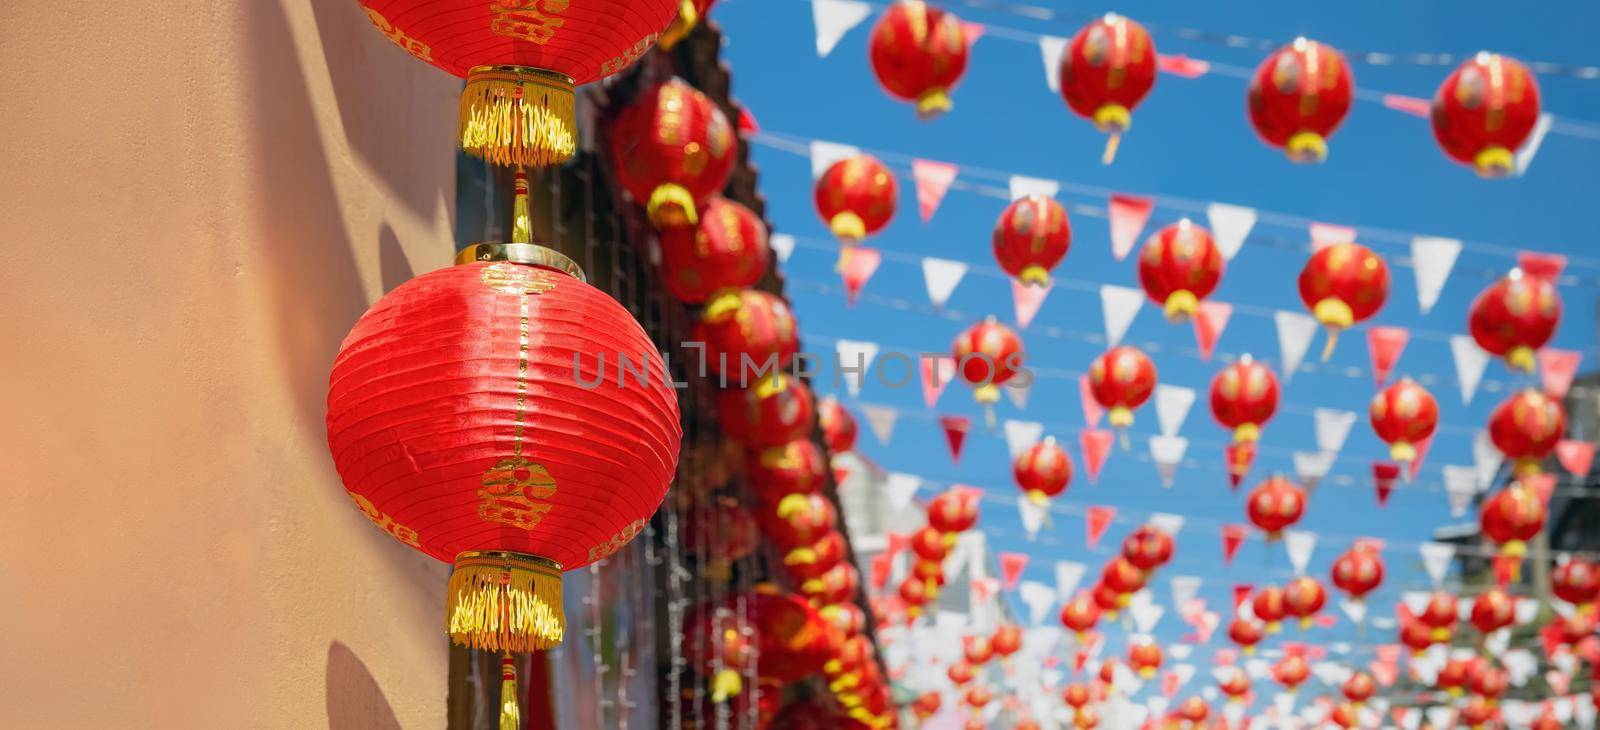 Chinese new year lanterns in china town. by toa55